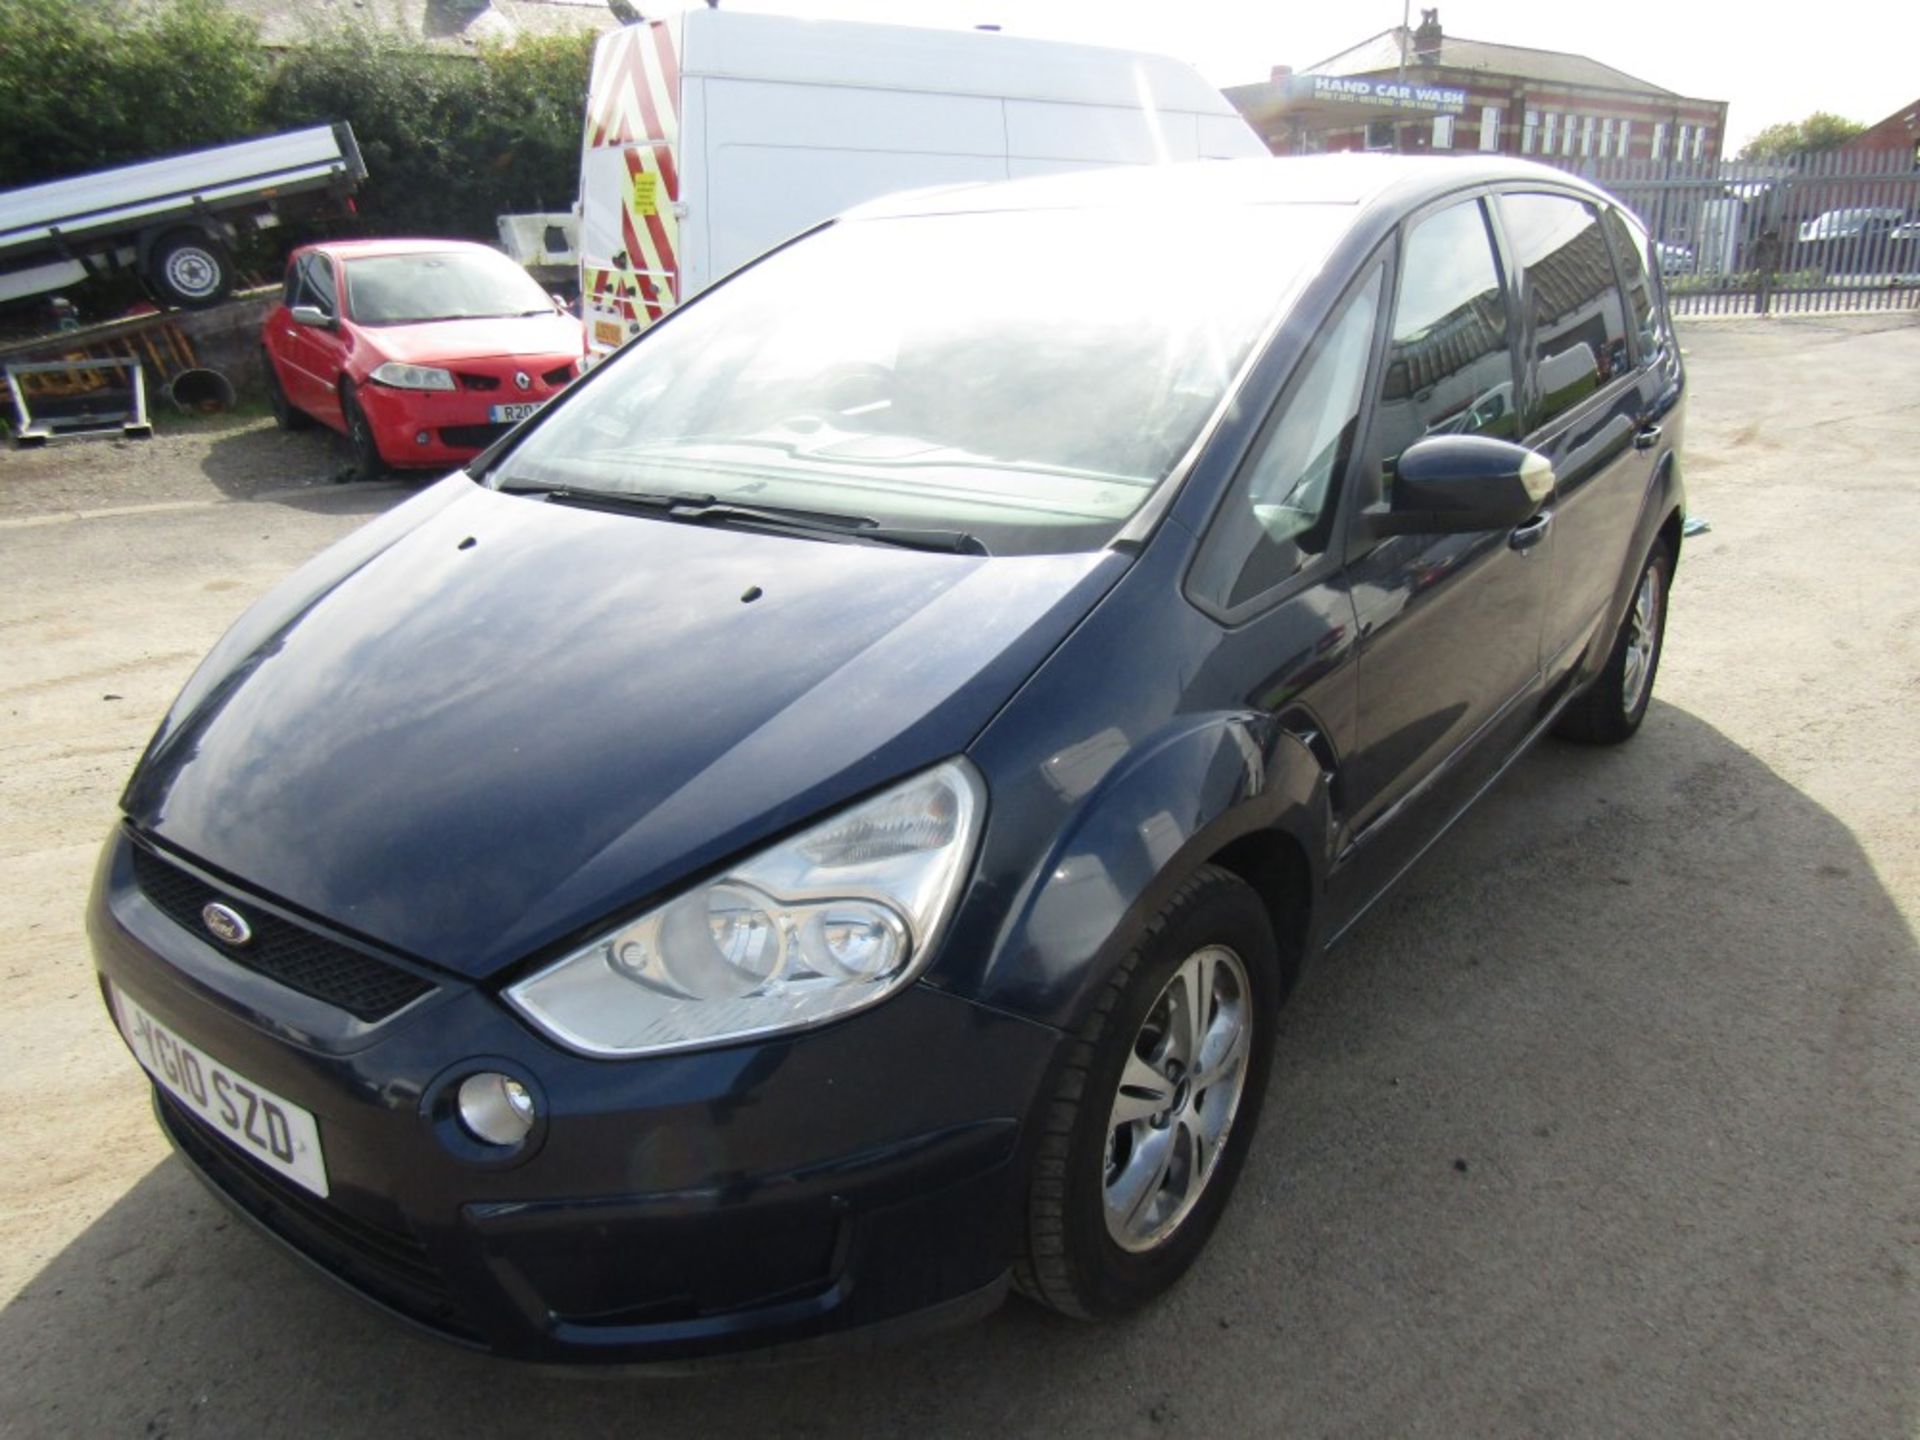 10 reg FORD GALAXY DIESEL 7 SEATER, 1ST REG 06/10, TEST 08/23, 98549M, V5 HERE, 4 FORMER KEEPERS [NO - Image 2 of 6